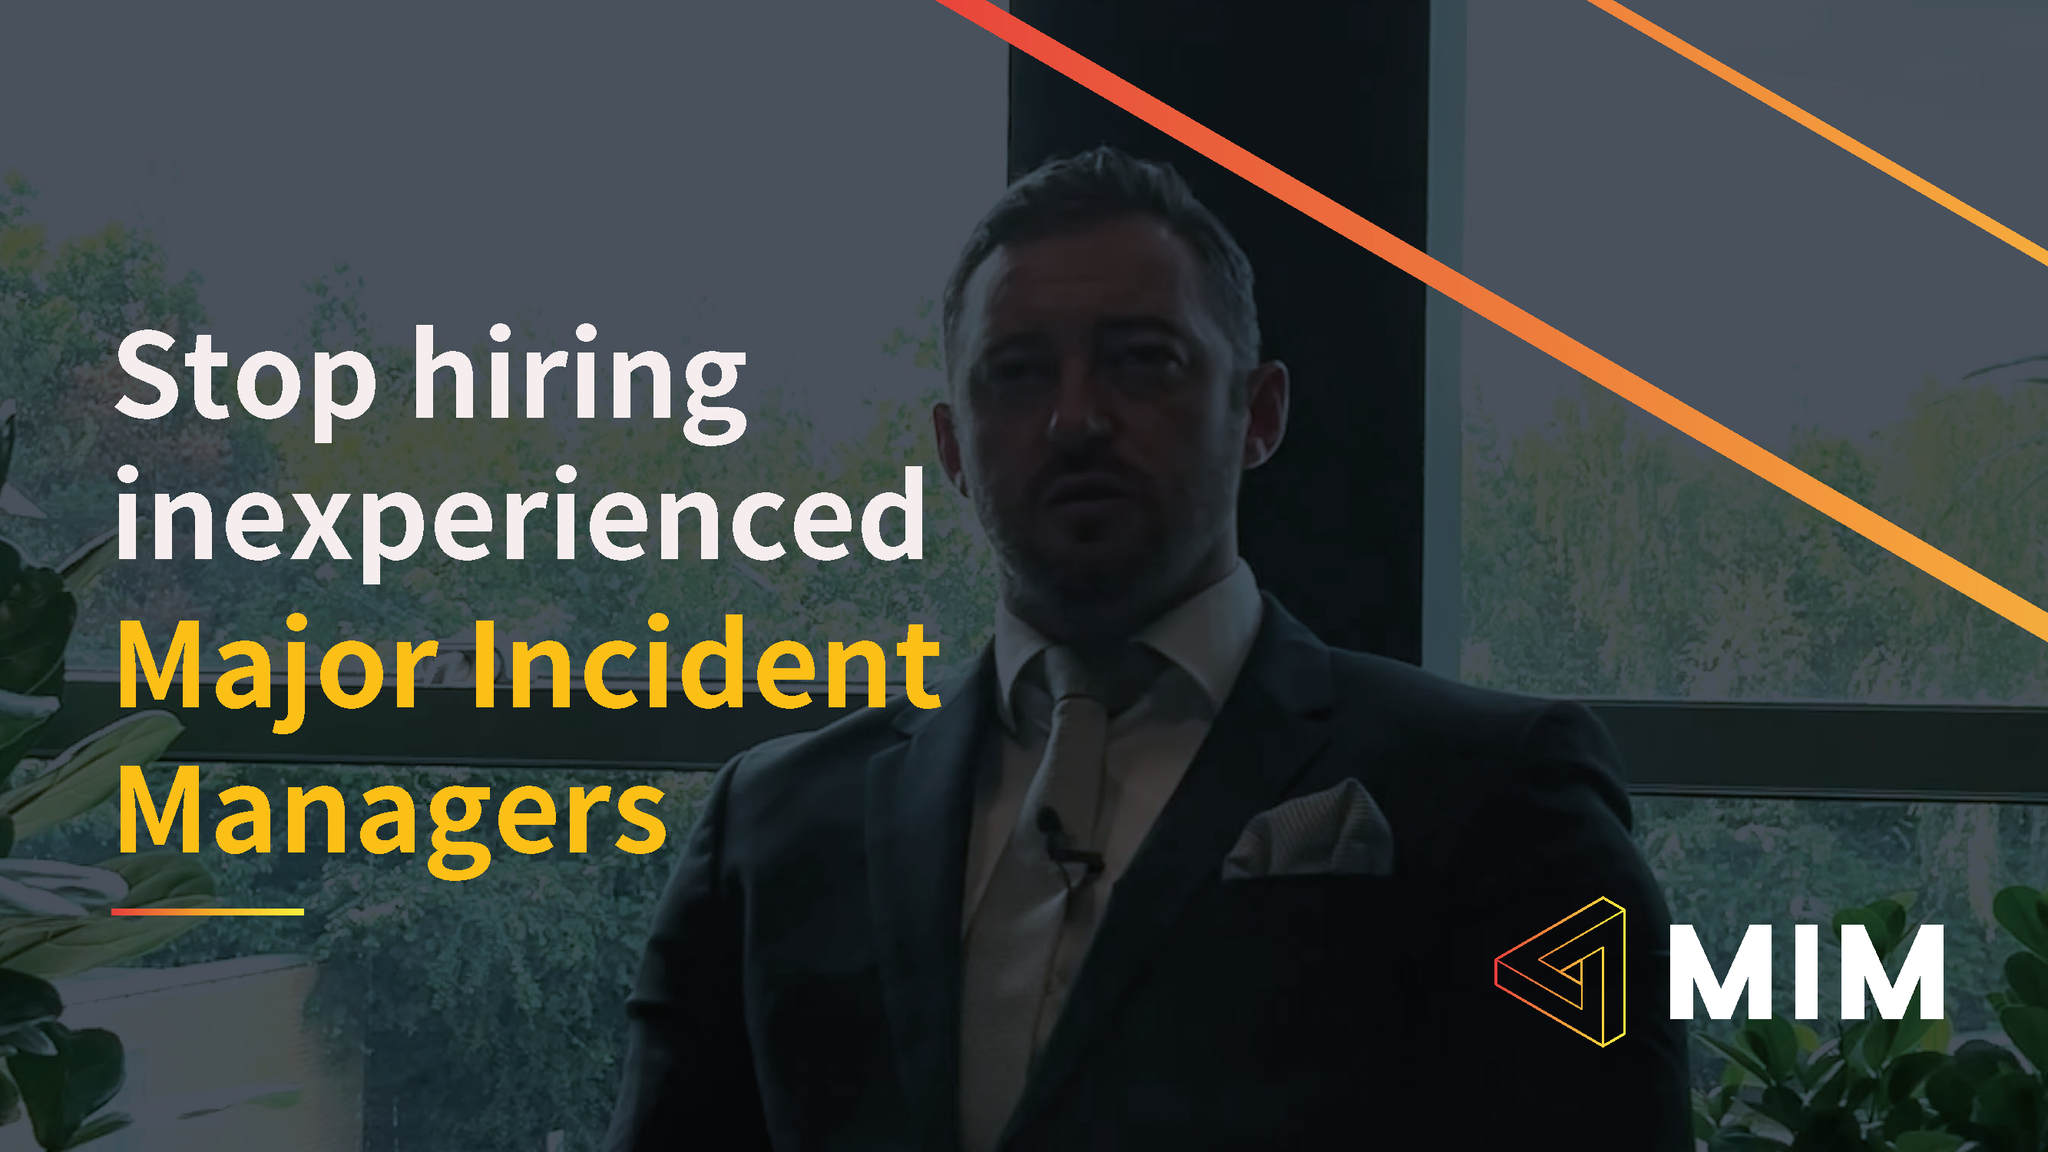 Stop hiring inexperienced Major Incident Managers